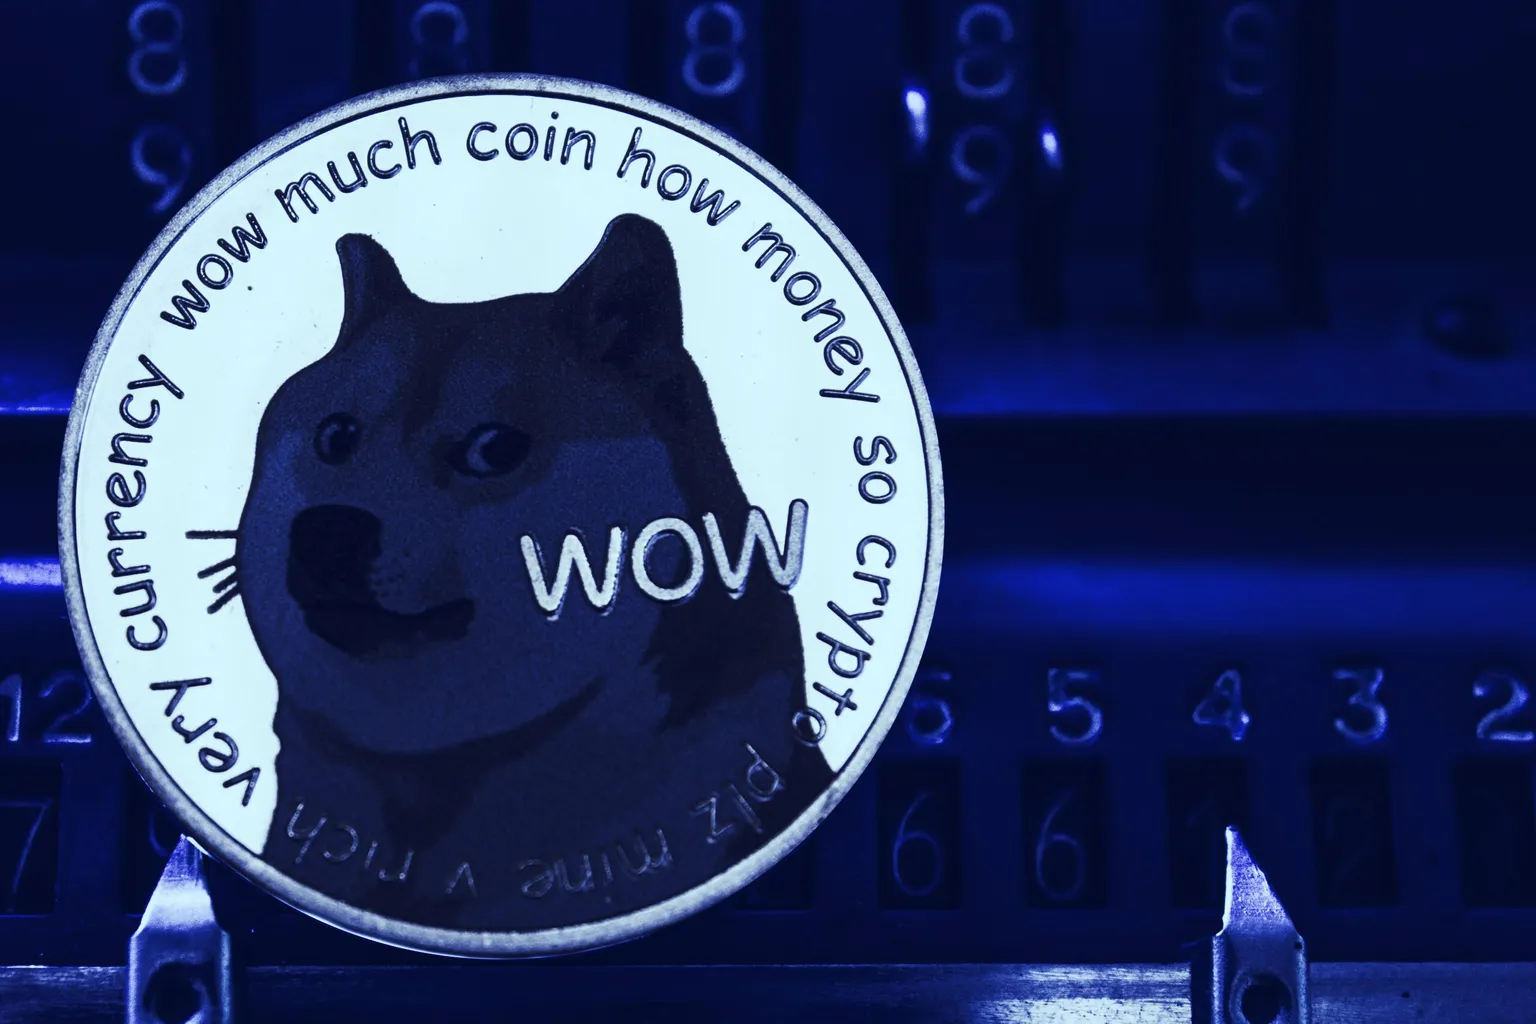 Dogecoin: so much wow (image: Shutterstock)